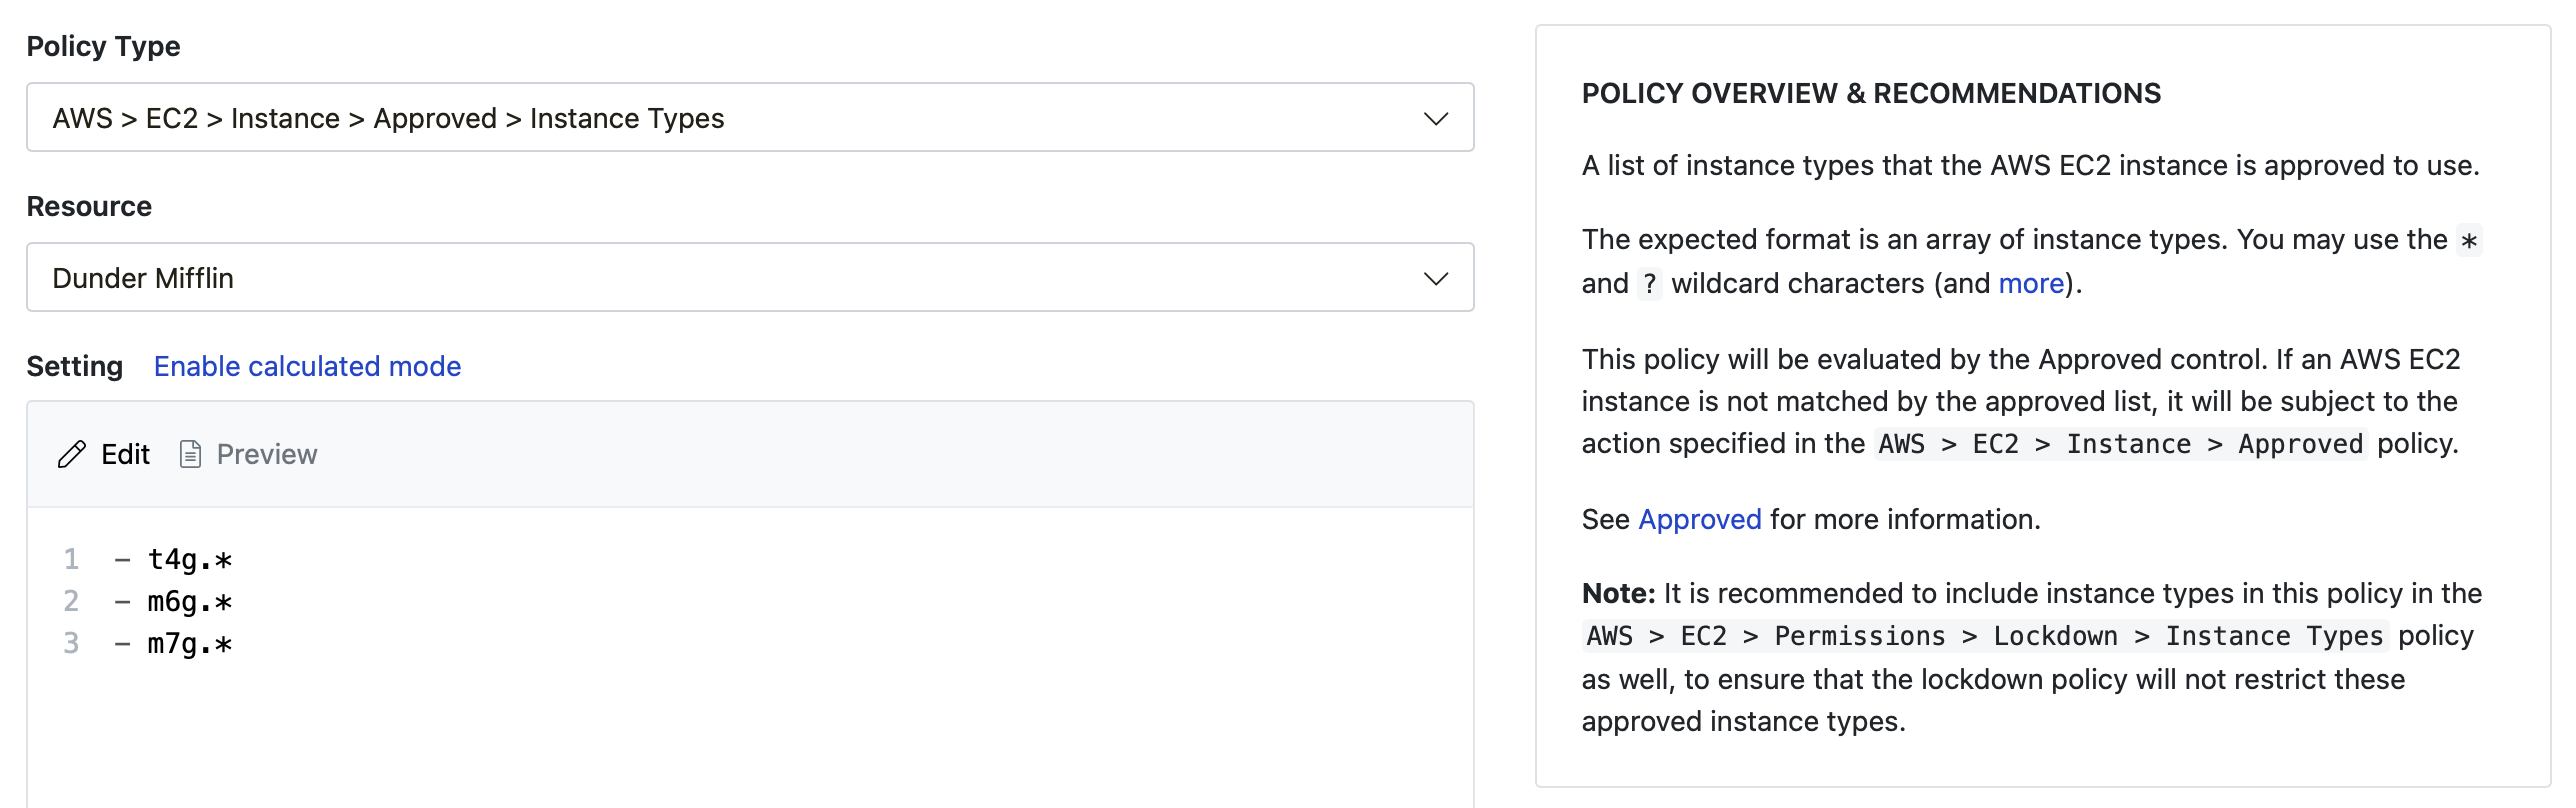 Policy setting to approve new instance types